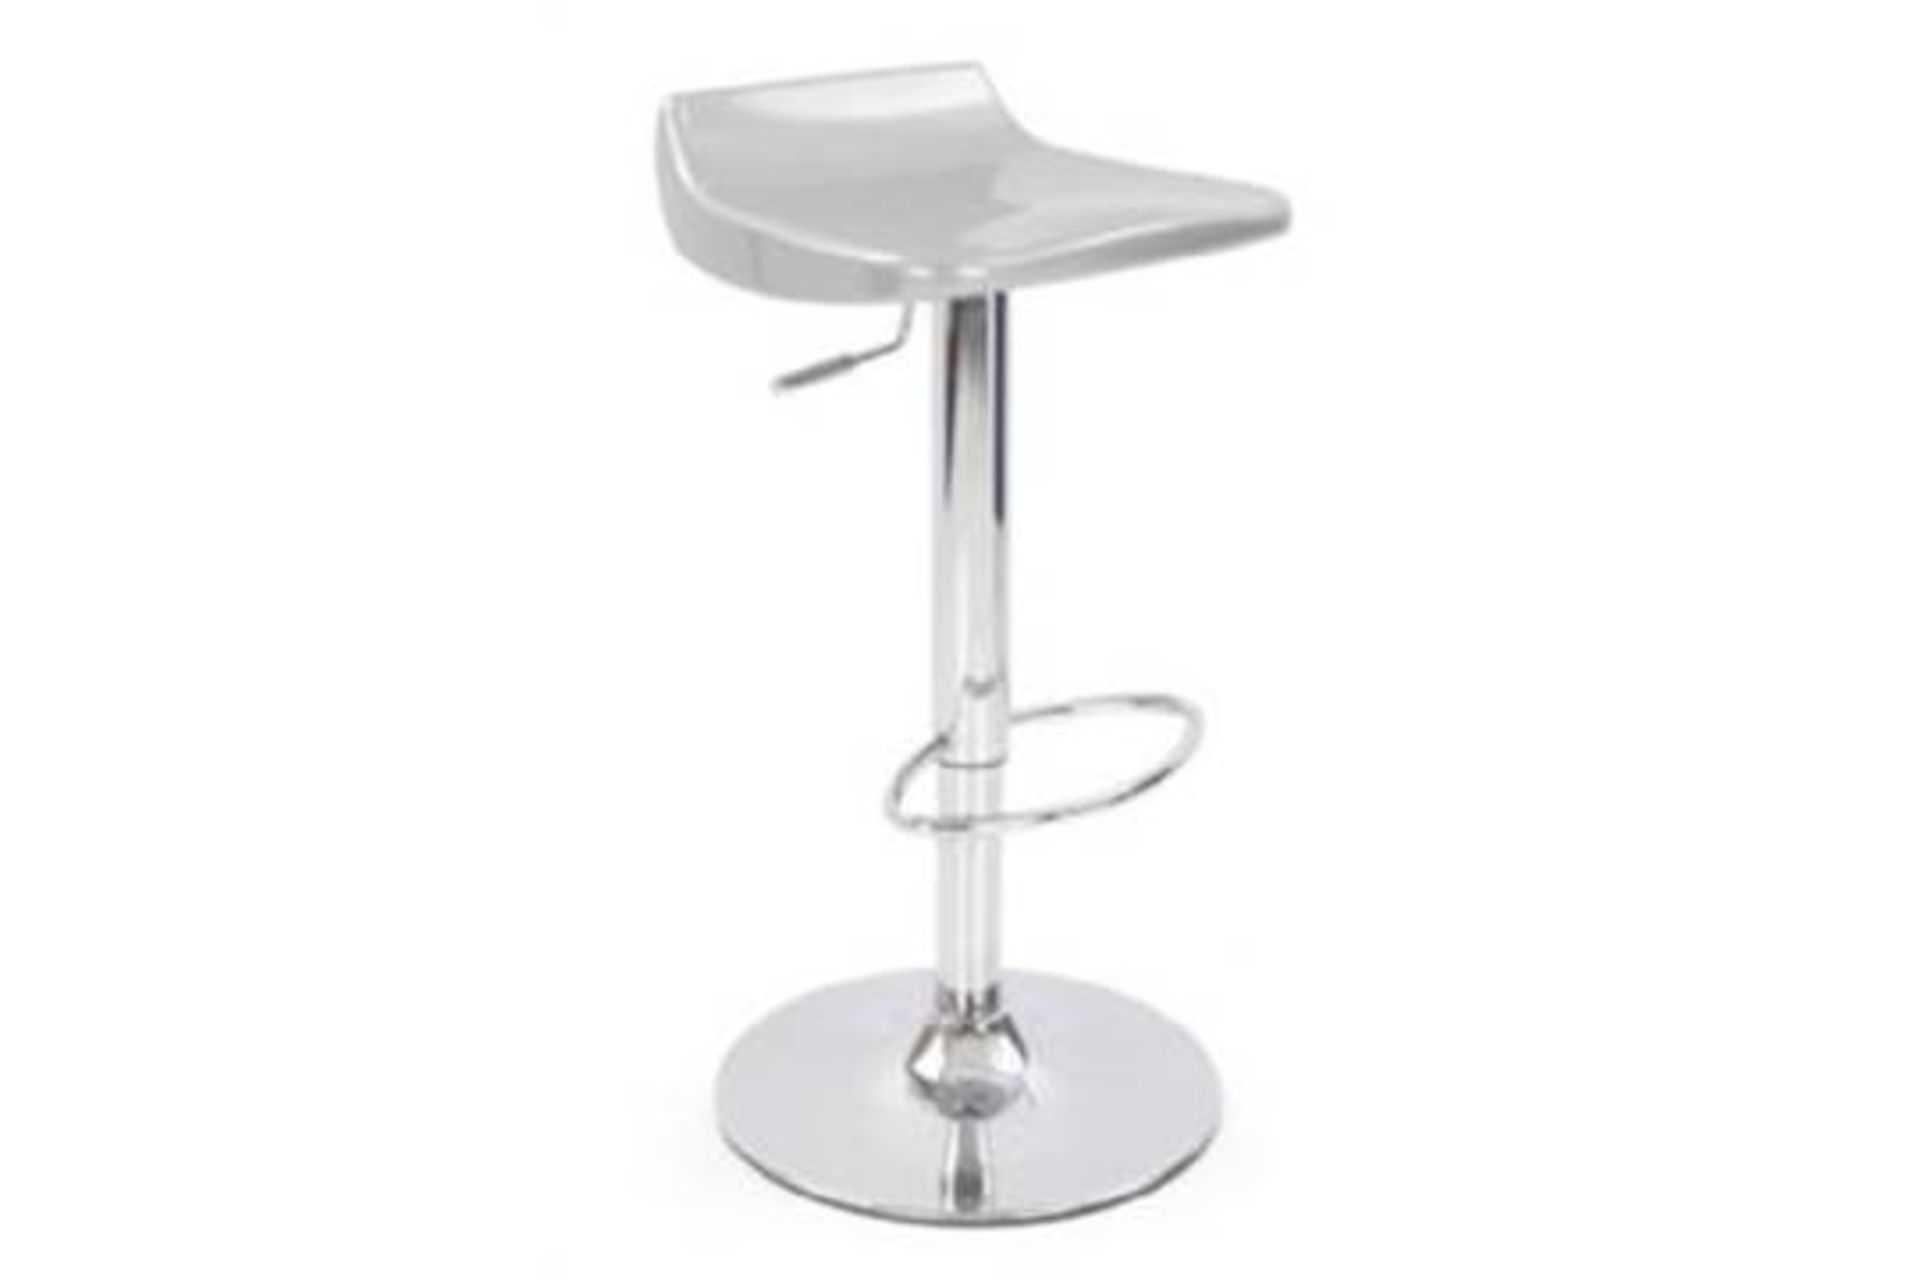 1 x Eliza Tinsley Designer Bar Stool - SILVER - Constructed in Strong ABS Plastic With Chrome Base